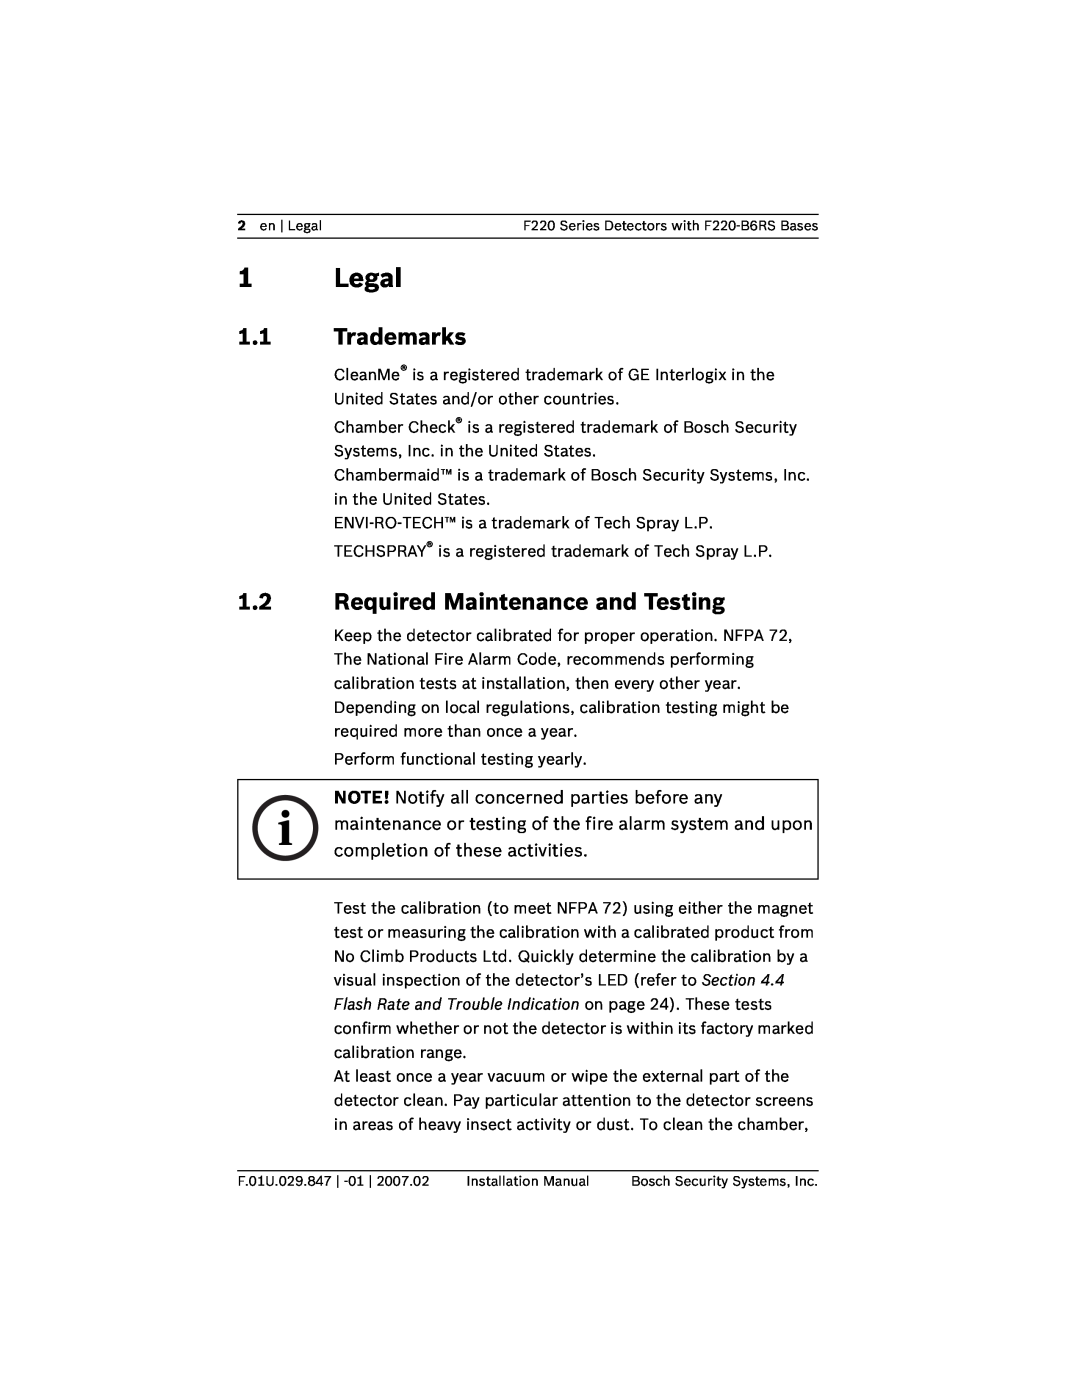 Bosch Appliances F220-B6RS installation manual Legal, 1.1Trademarks, 1.2Required Maintenance and Testing 